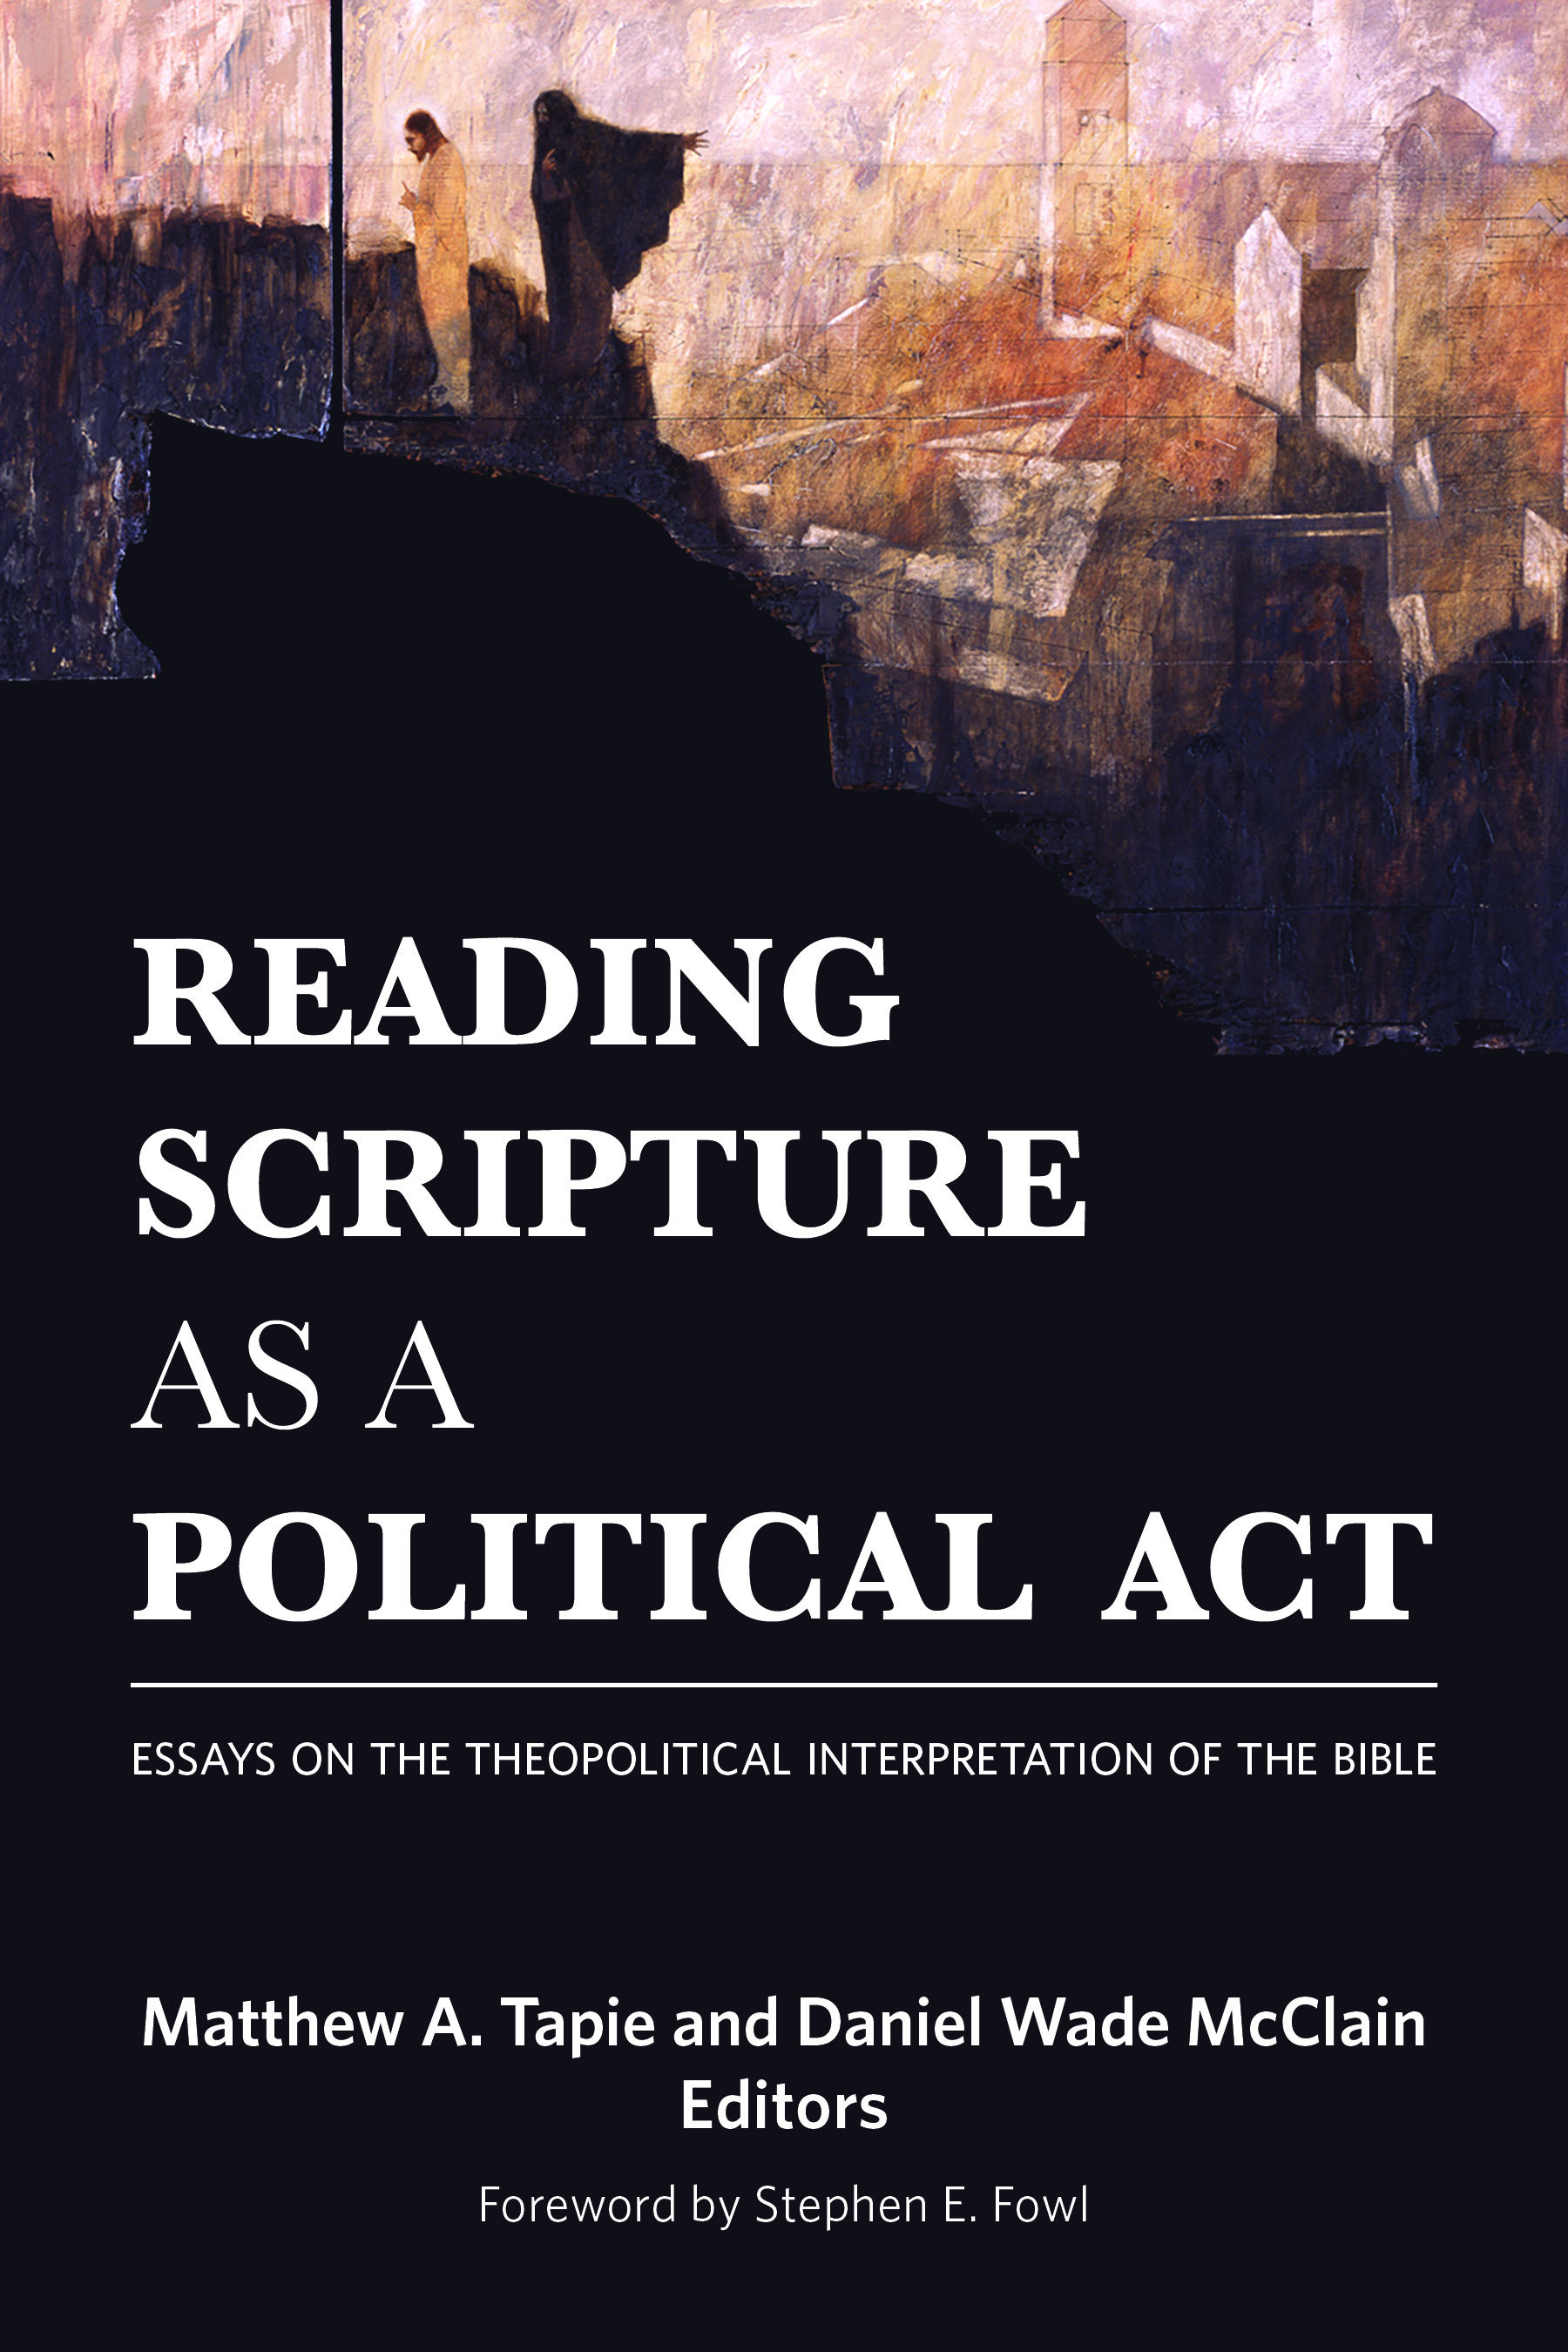 Reading Scripture as a Political Act: Essays on the Theopolitical Interpretation of the Bible